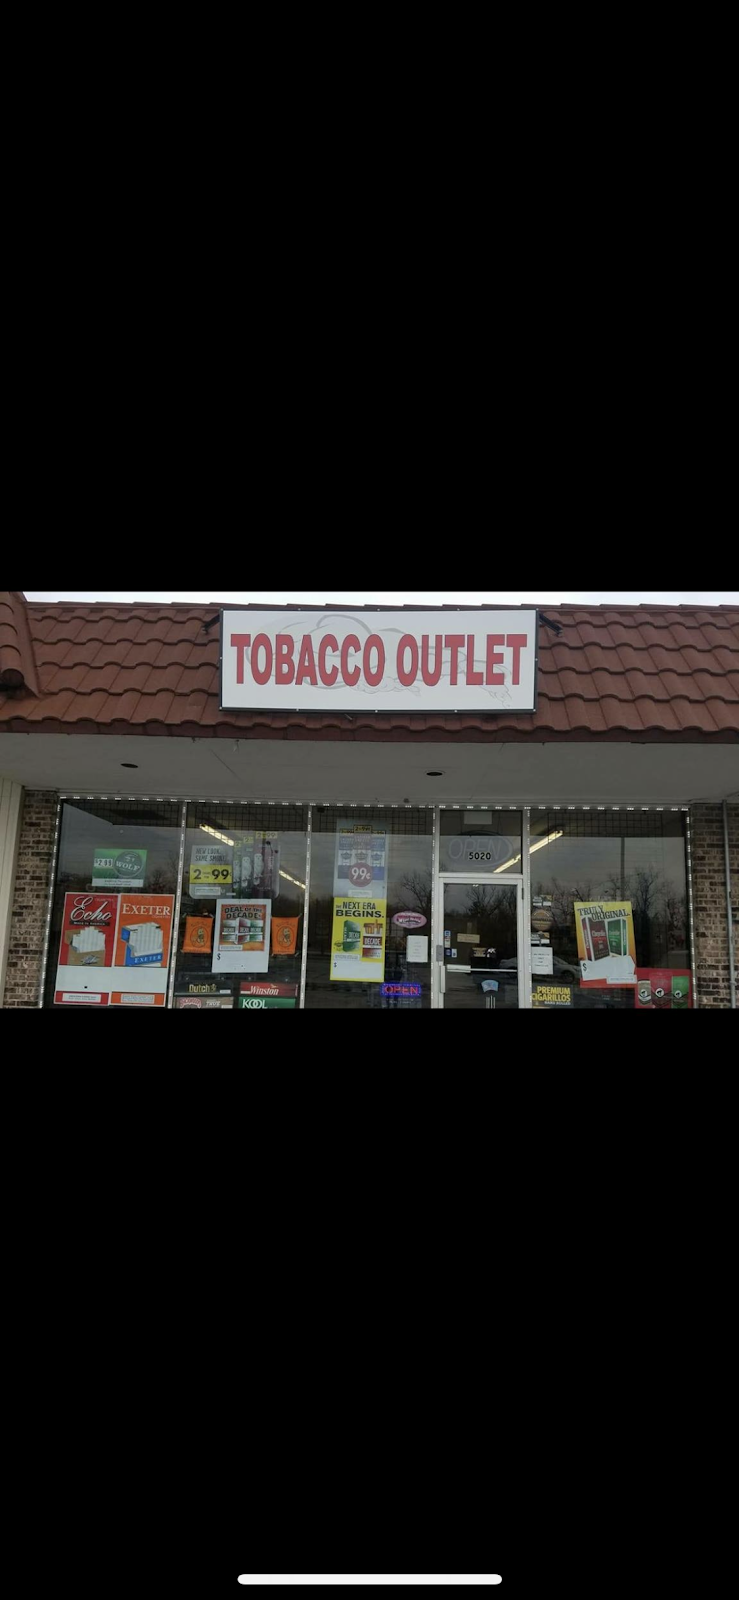 TOBACCO OUTLET